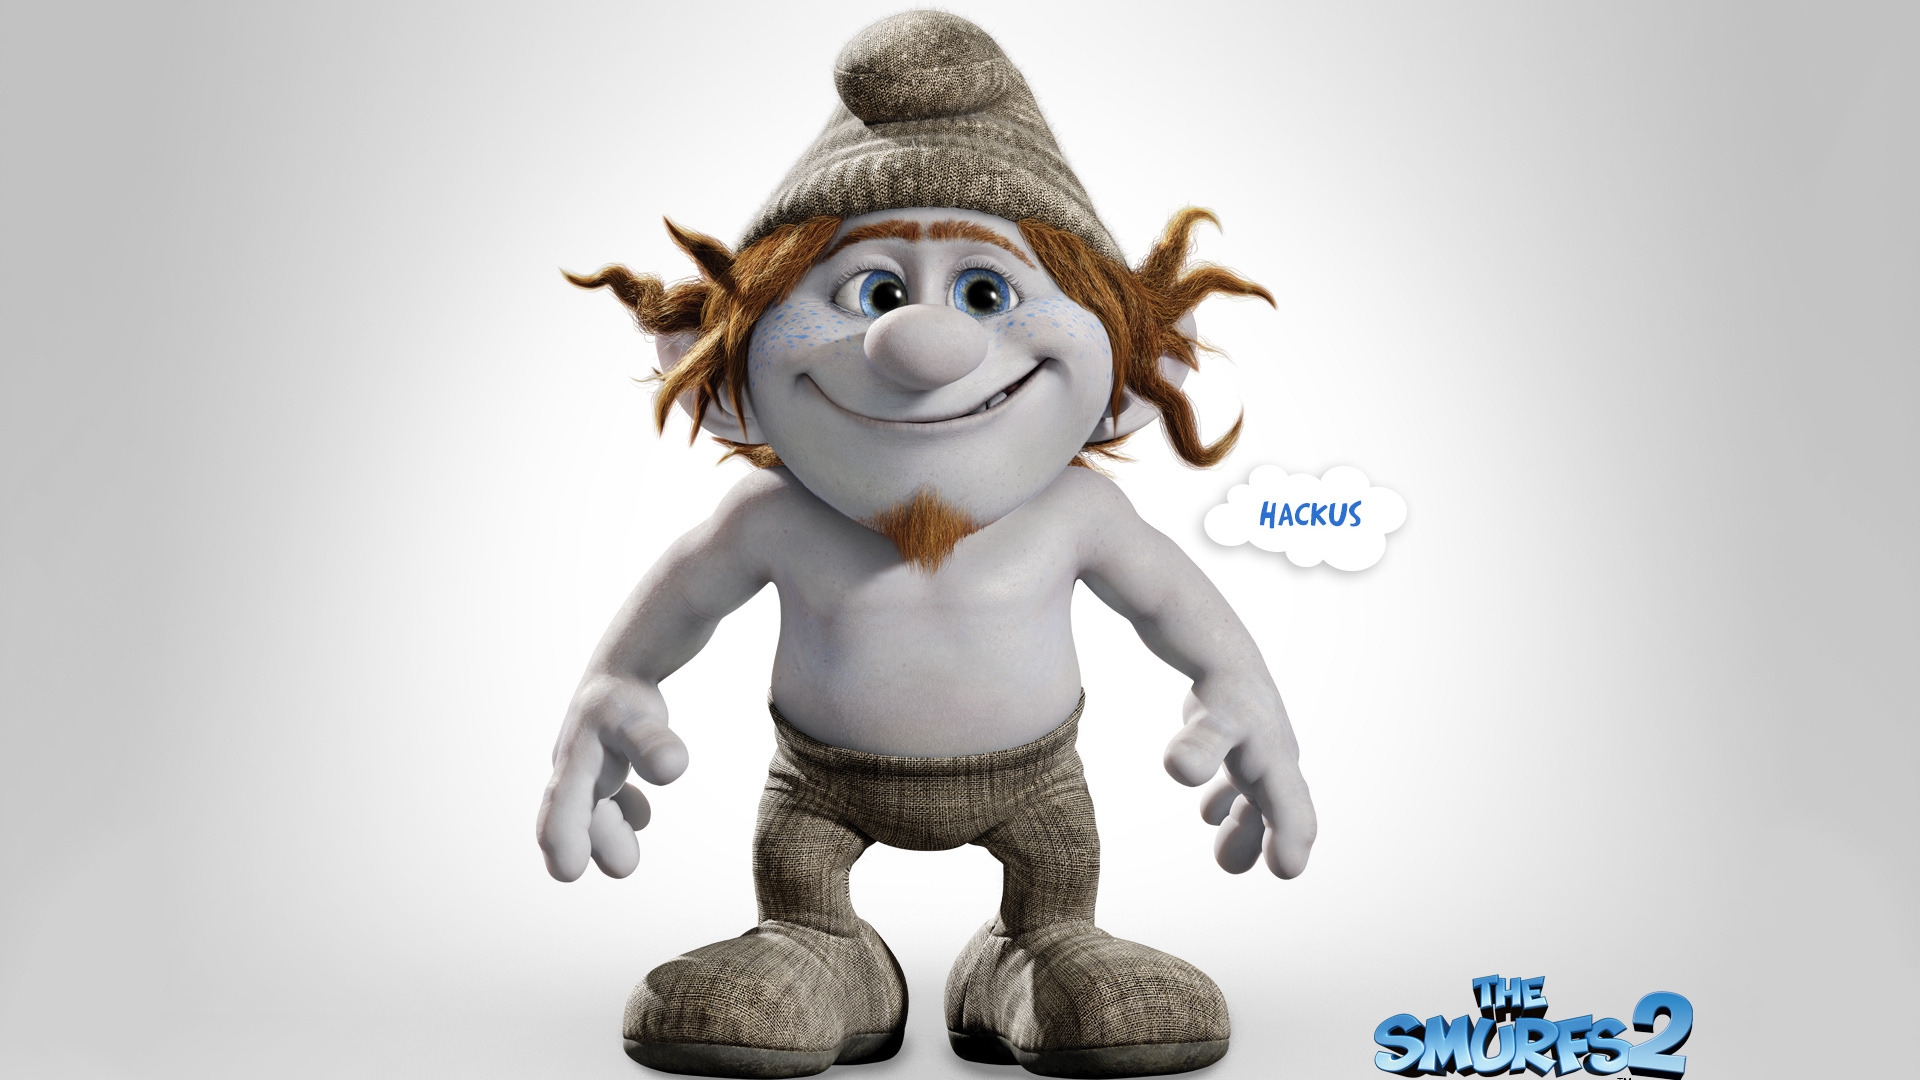 Hachus The Smurfs 2 for 1920 x 1080 HDTV 1080p resolution